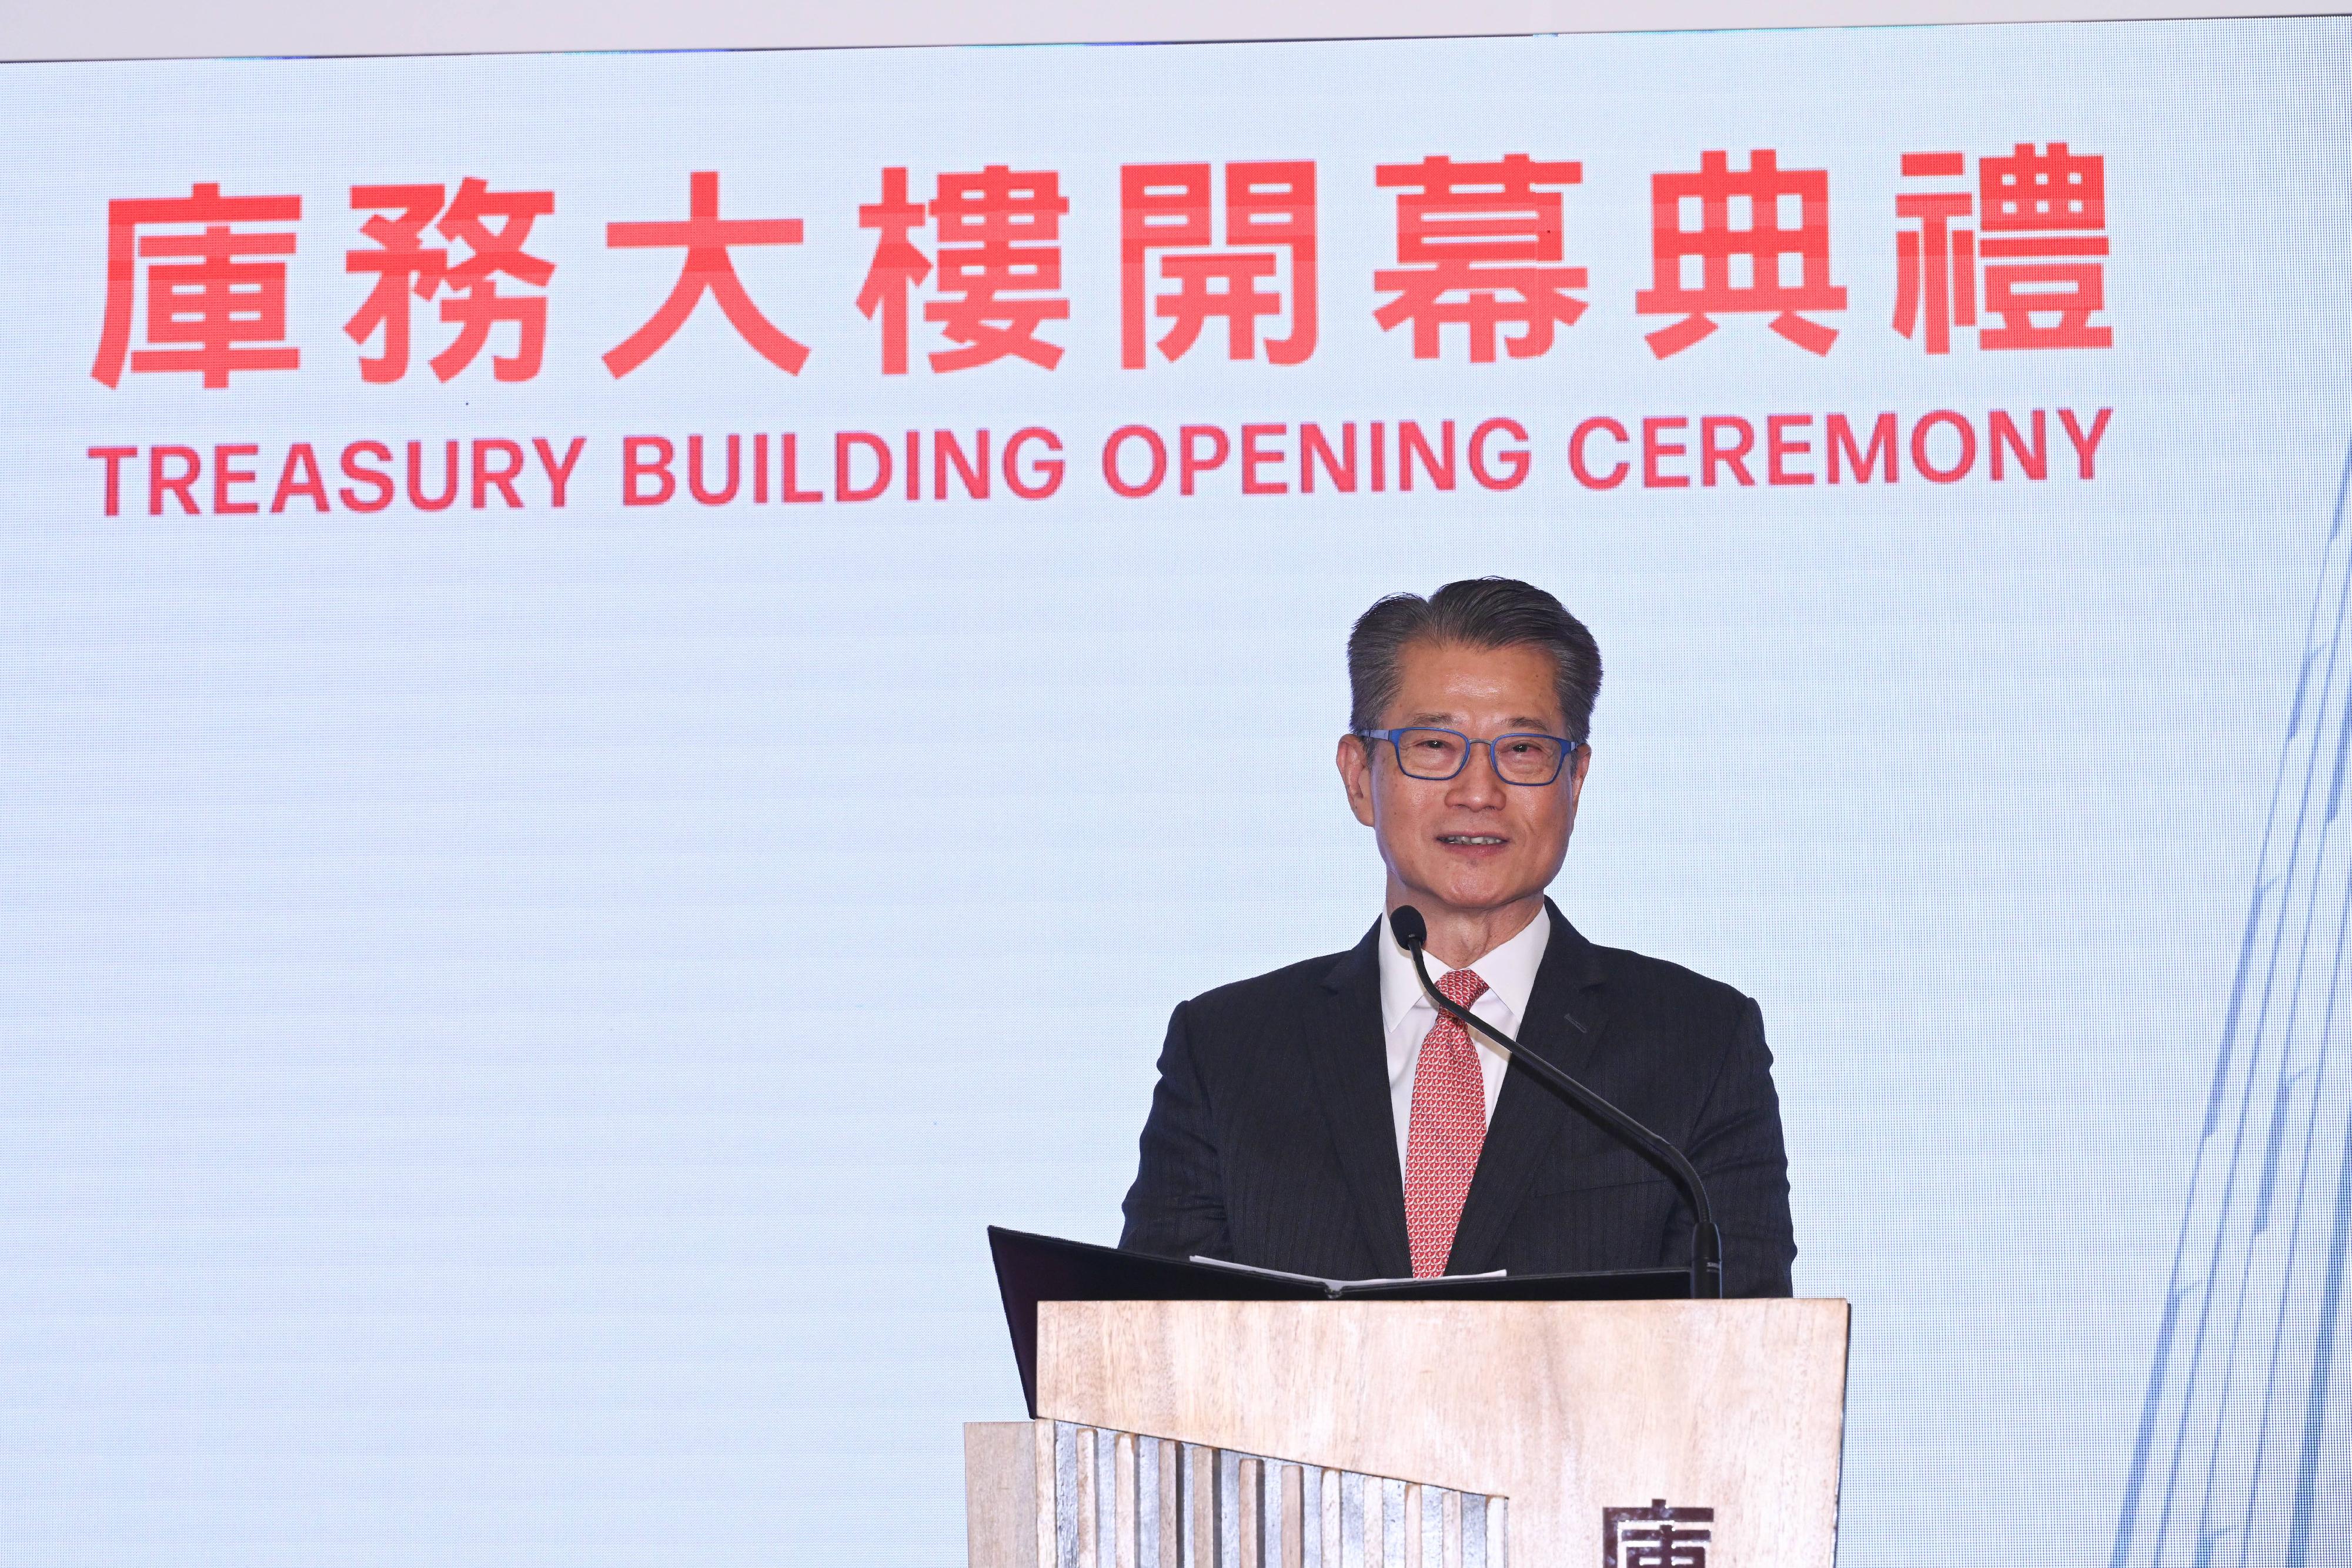 The opening ceremony of the Treasury Building was held today (March 12). Photo shows the Financial Secretary, Mr Paul Chan, delivering a speech for the event.

